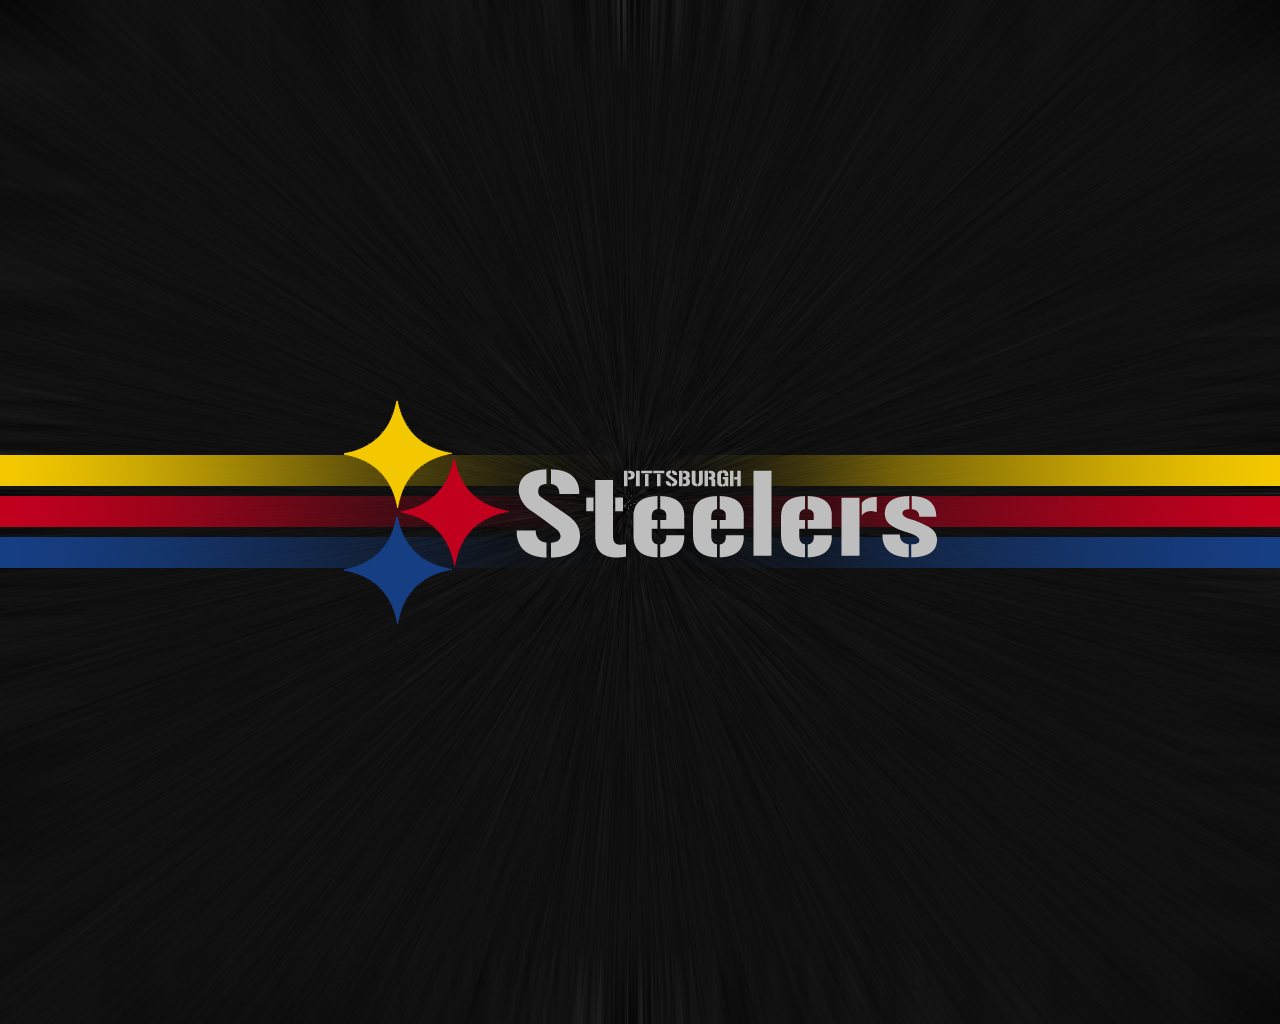 Steelers Wallpaper HD Image Amp Pictures Becuo